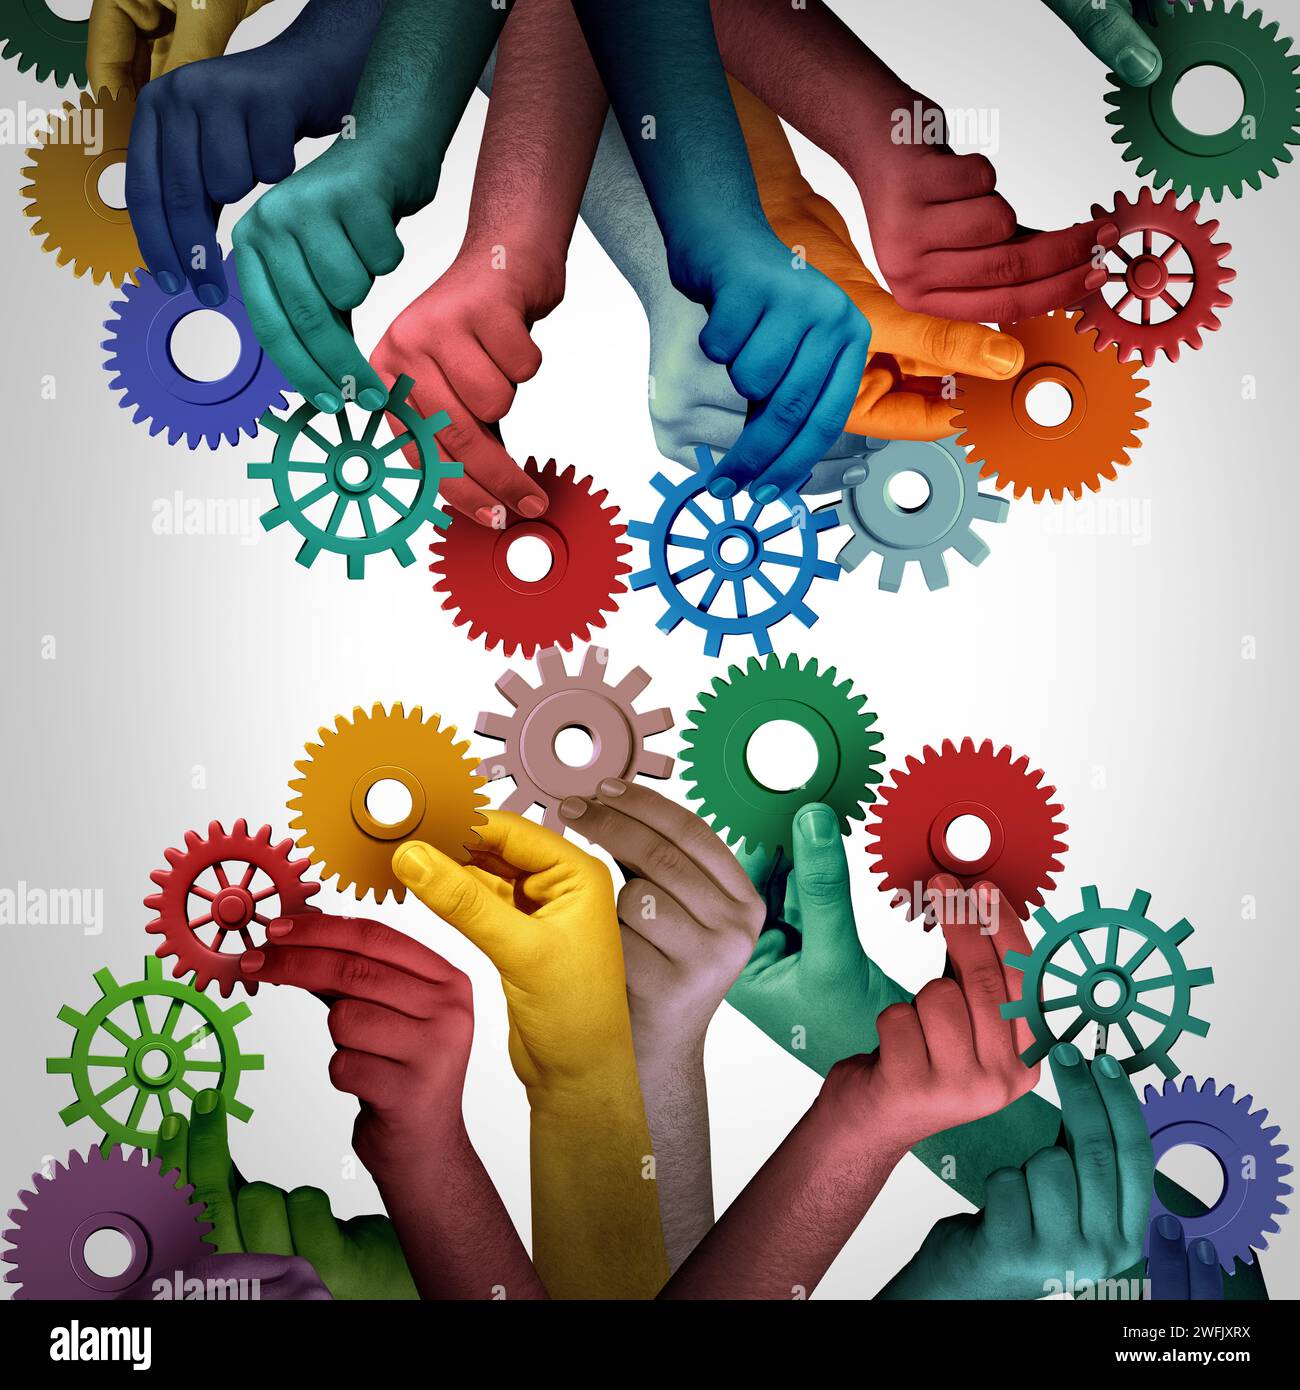 United employees and worker unity as a group of diverse people using gears and cogs to connect as a strong collaborative company working together Stock Photo